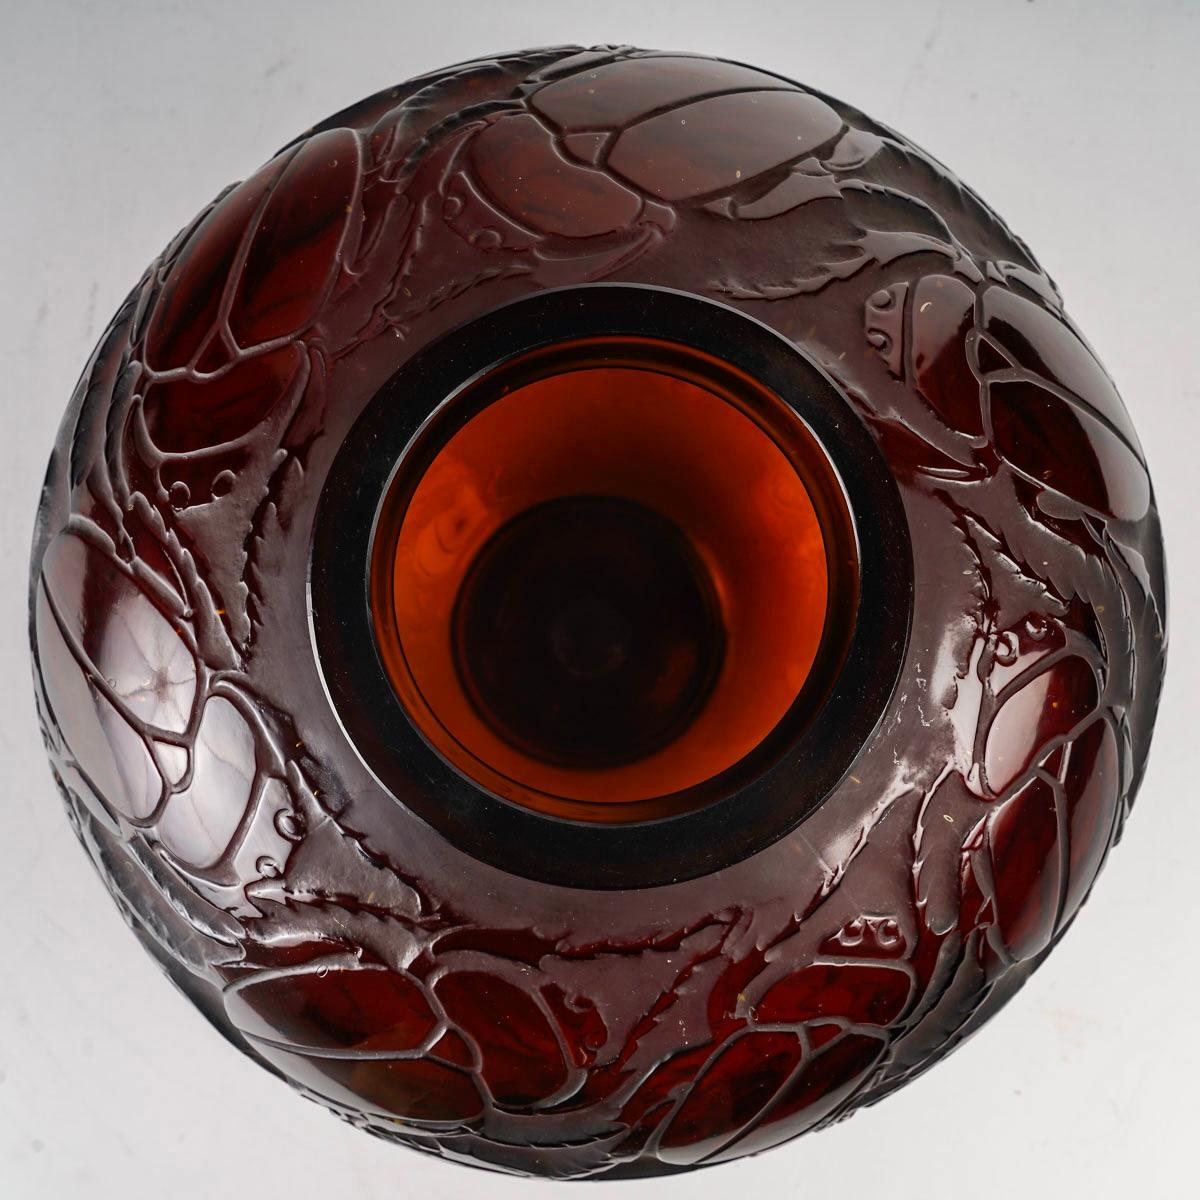 Molded 1923 Rene Lalique - Vase Gros Scarabees Red Amber Glass Beetles For Sale